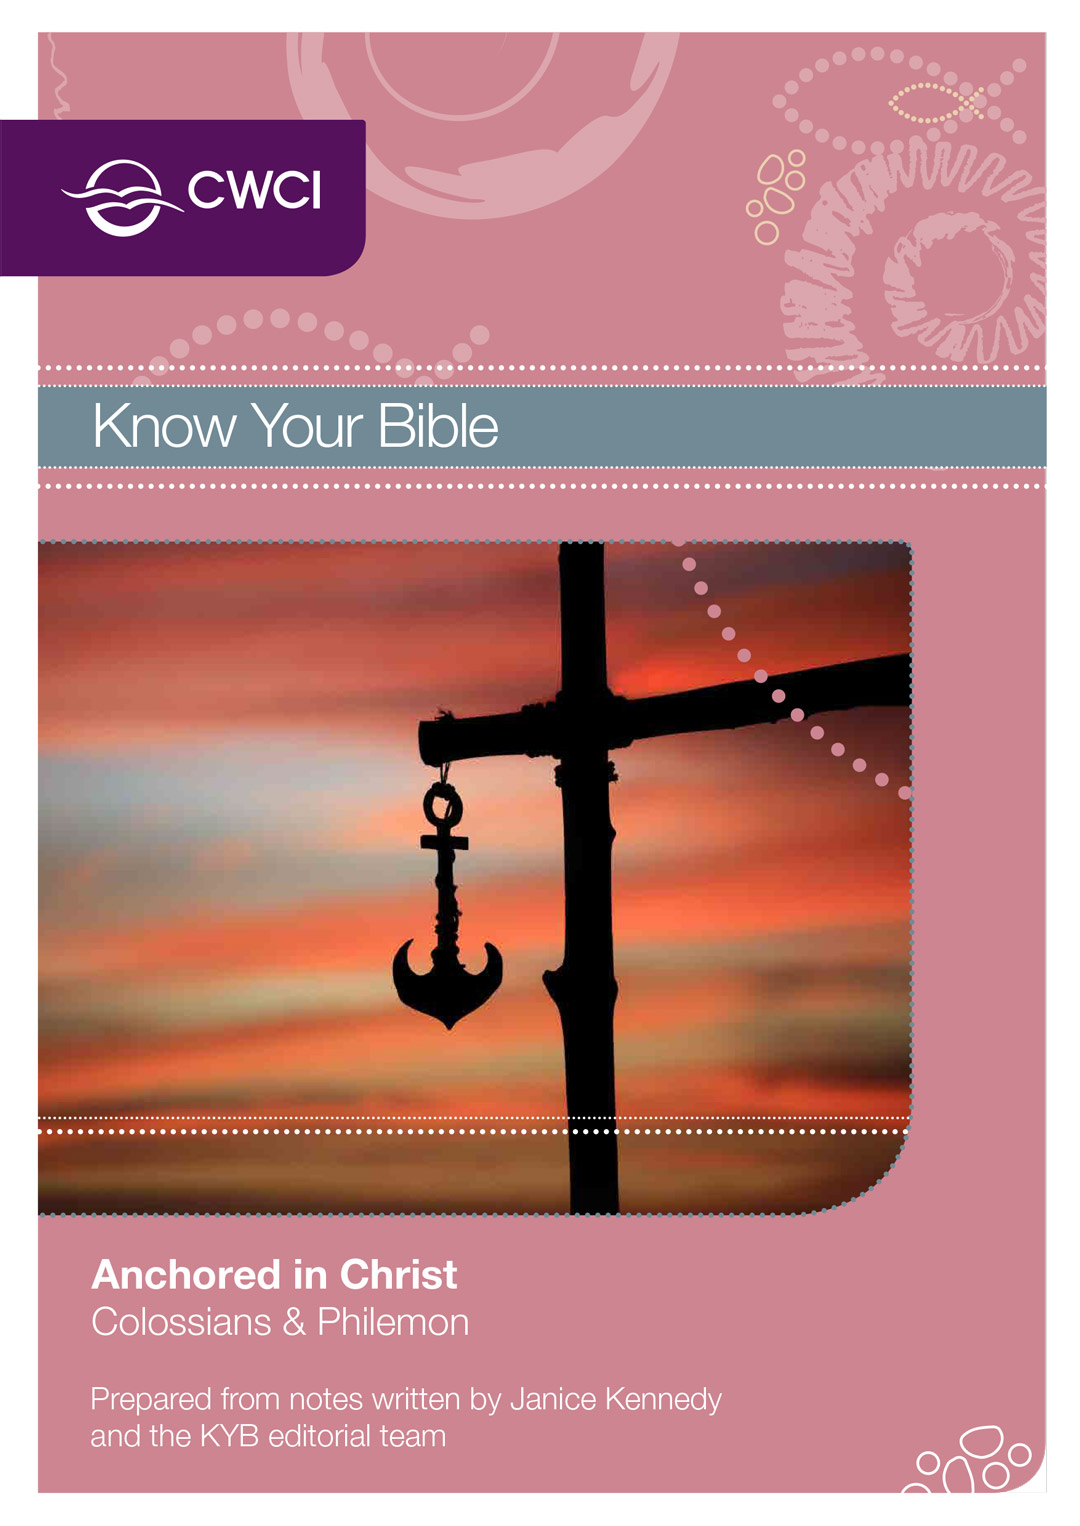 Anchored in Christ: Colossians and Philemon